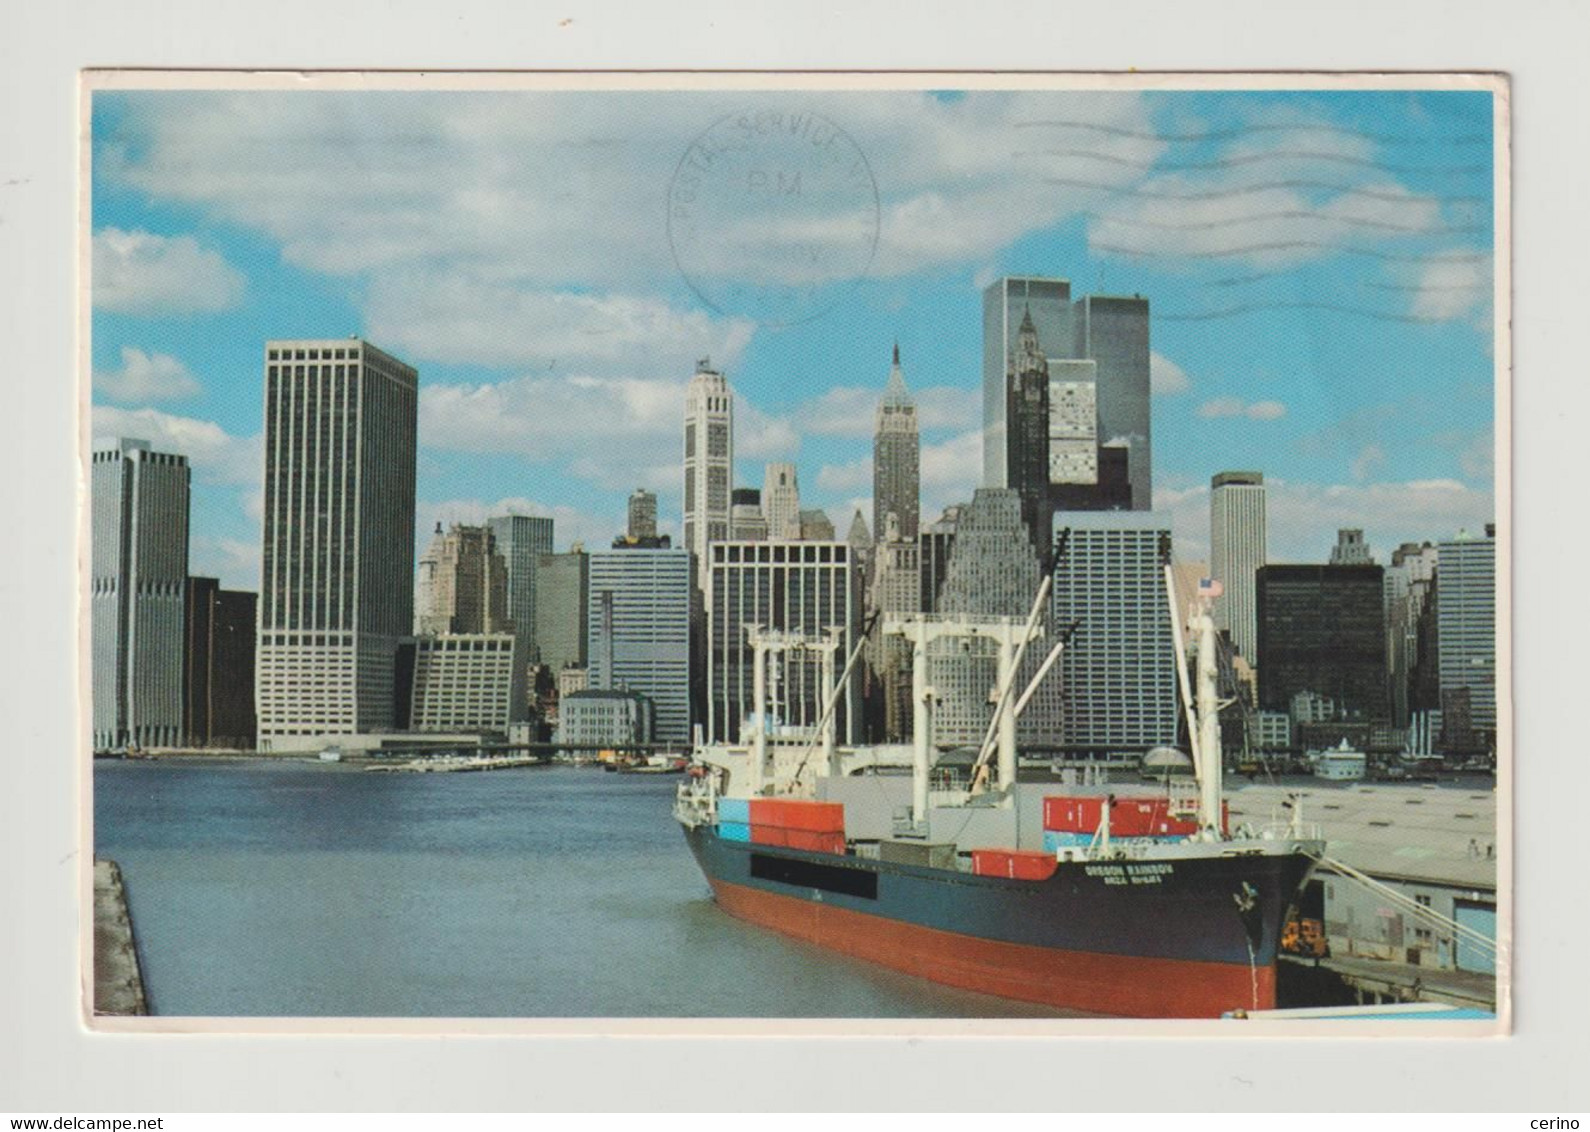 NEW  YORK  CITY:  OCEAN  FREIGHTER  DOCKED  AT  A  BROOKLYN  PIER ...-  STAMP  REMOVED  -  TO  ITALY  -  FG - Bruggen En Tunnels